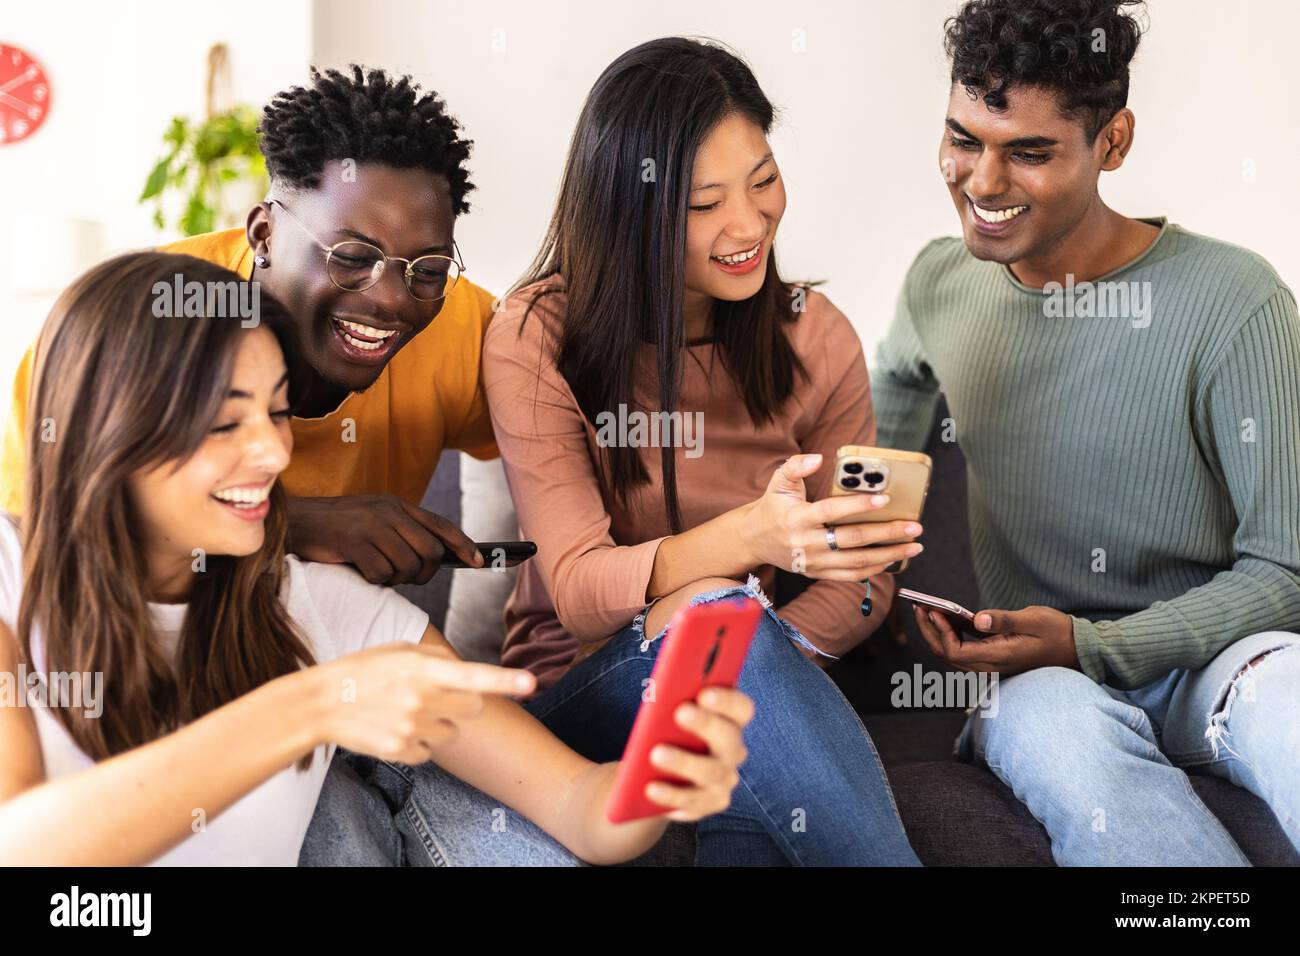 Group of diverse young people having fun using smartphone at home Stock Photo